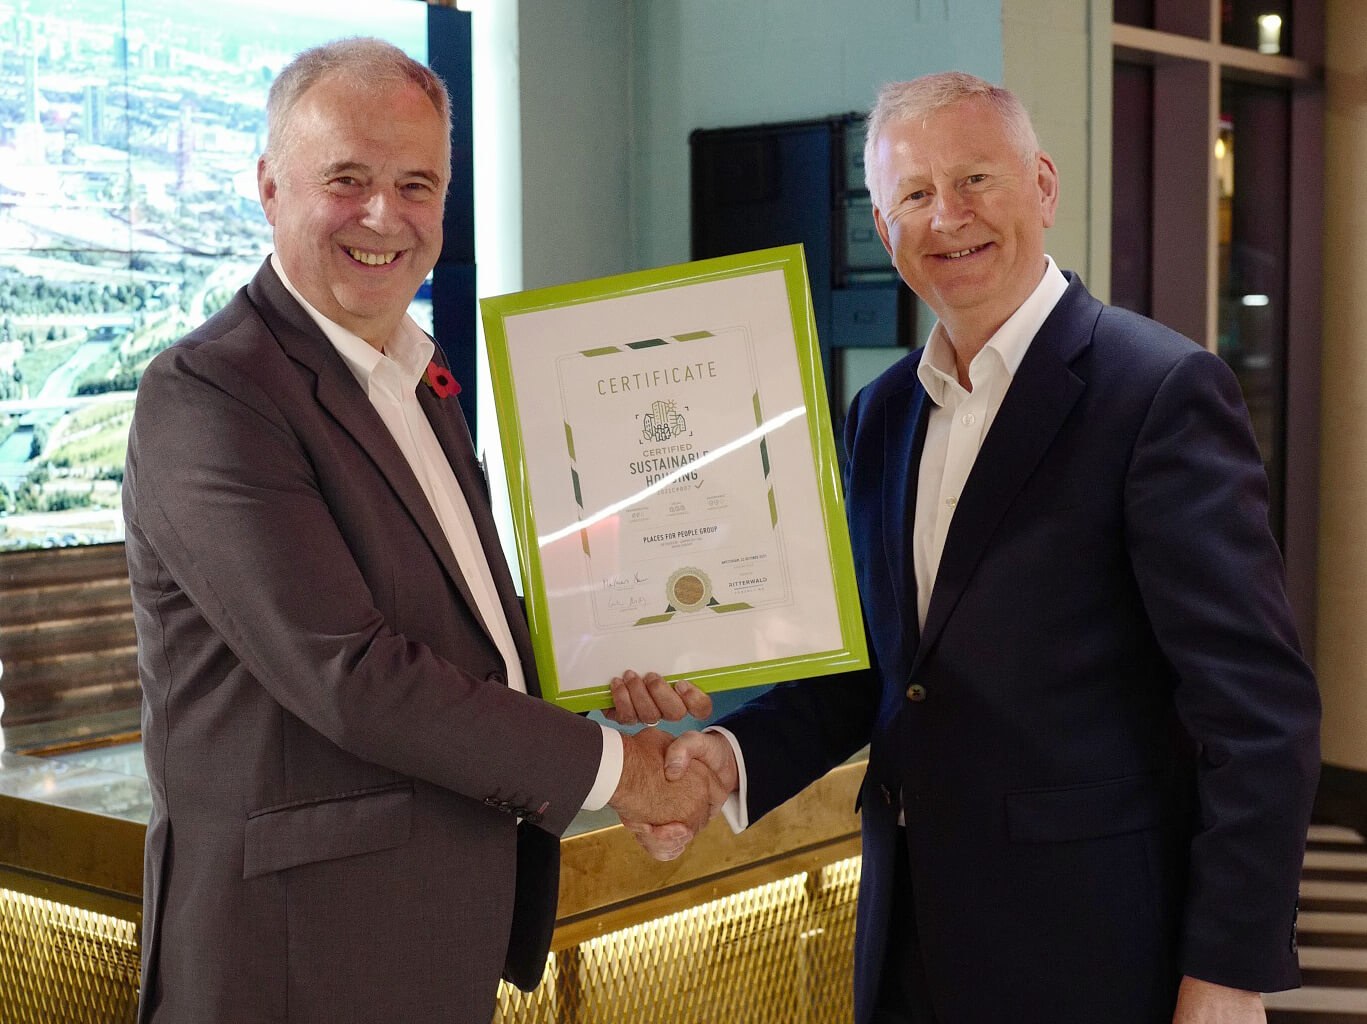 David Cowans, CEO of Places for People is presented with the Certified Sustainability Housing Label by Austen Reid, the UK Director of Ritterwald Consulting at the COP26 Fringe Event in London.